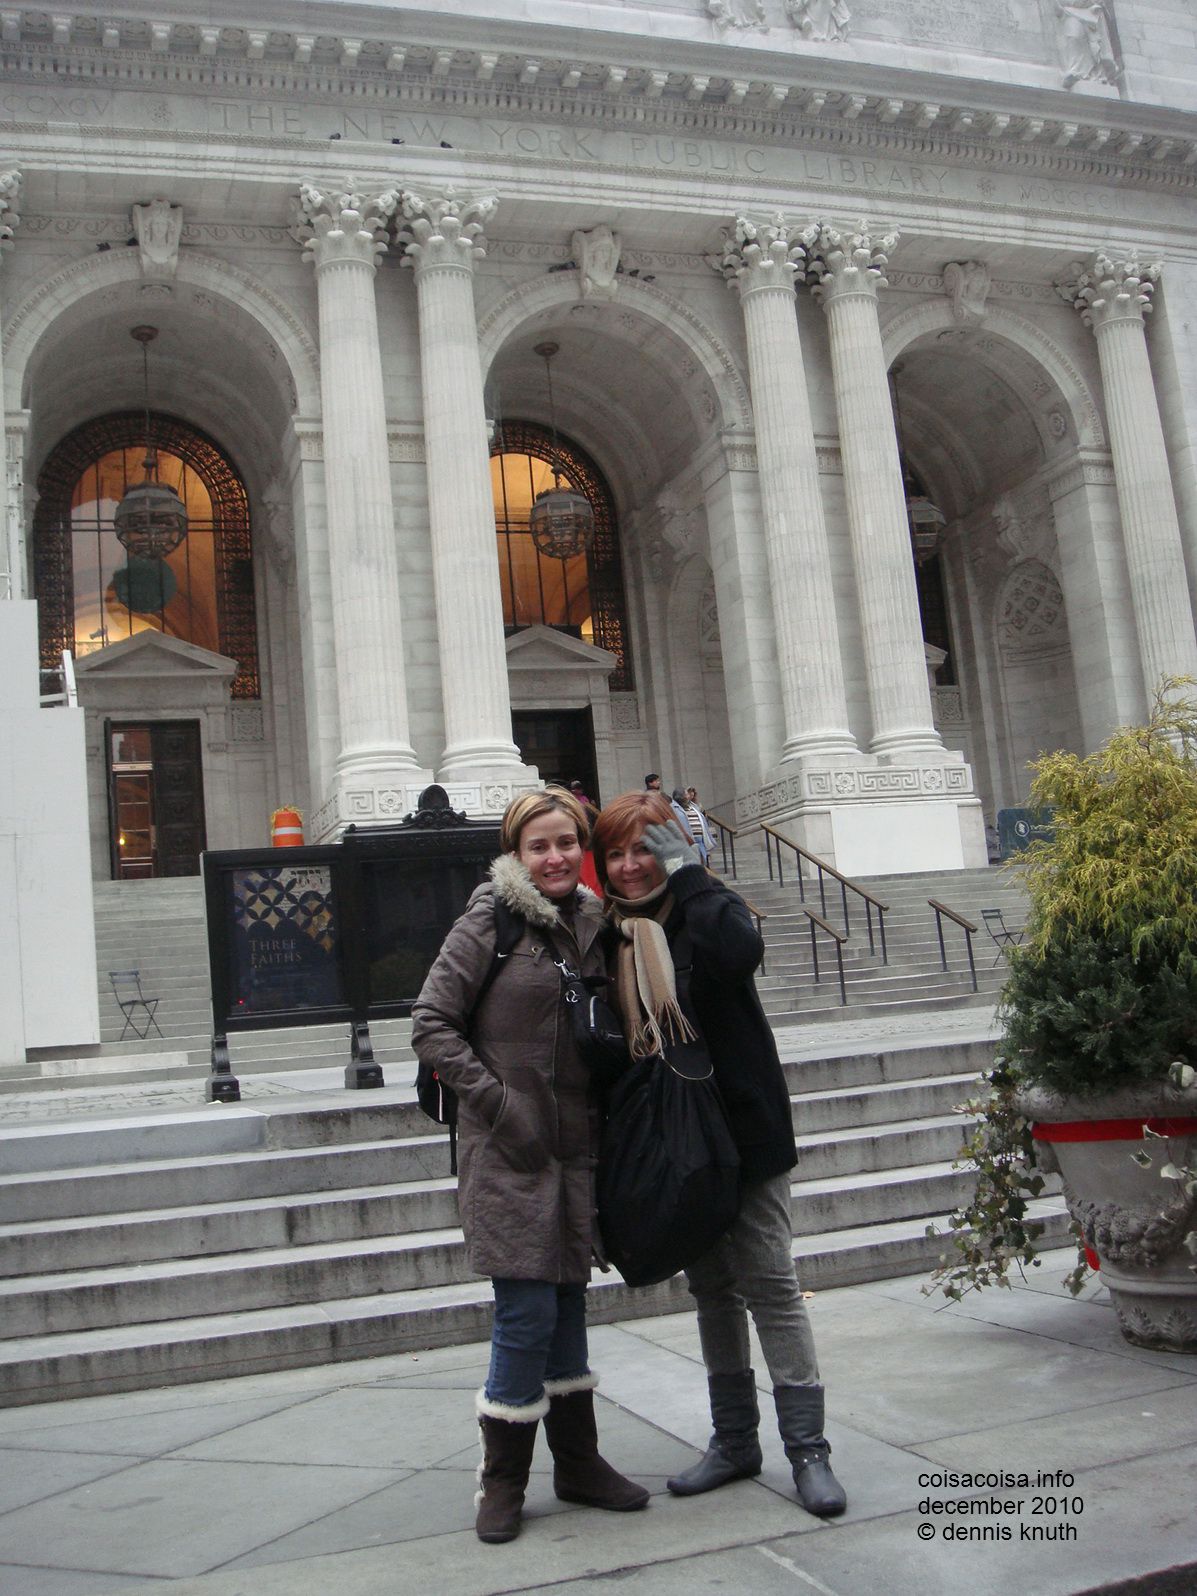 Concinha and Lisette at the New York Library Stairs